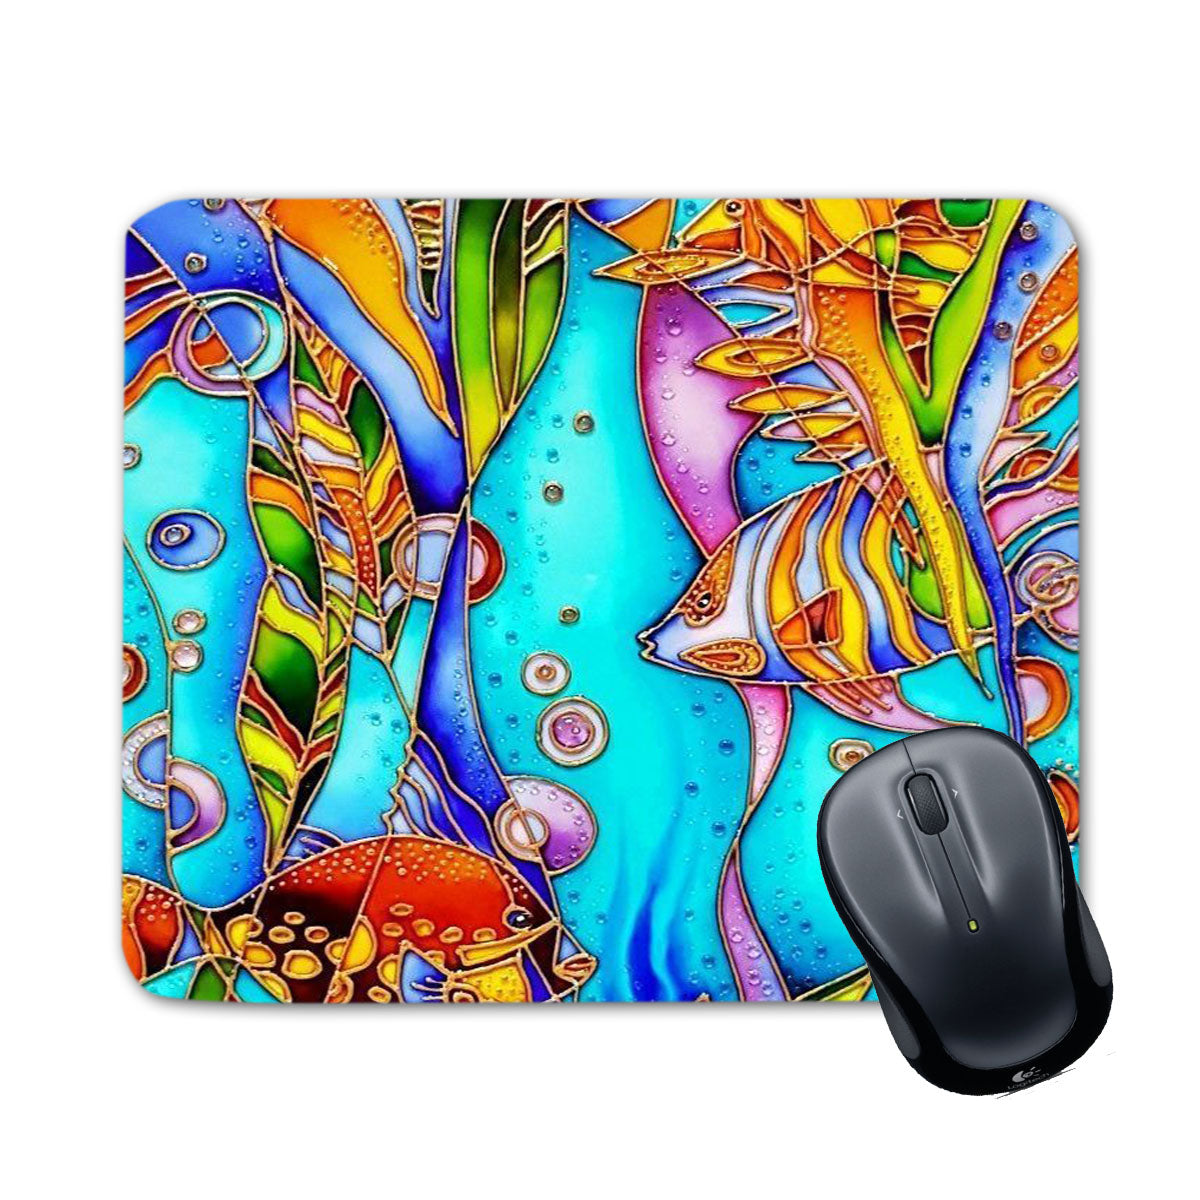 Chillaao Canvas Painting  Mouse Pad